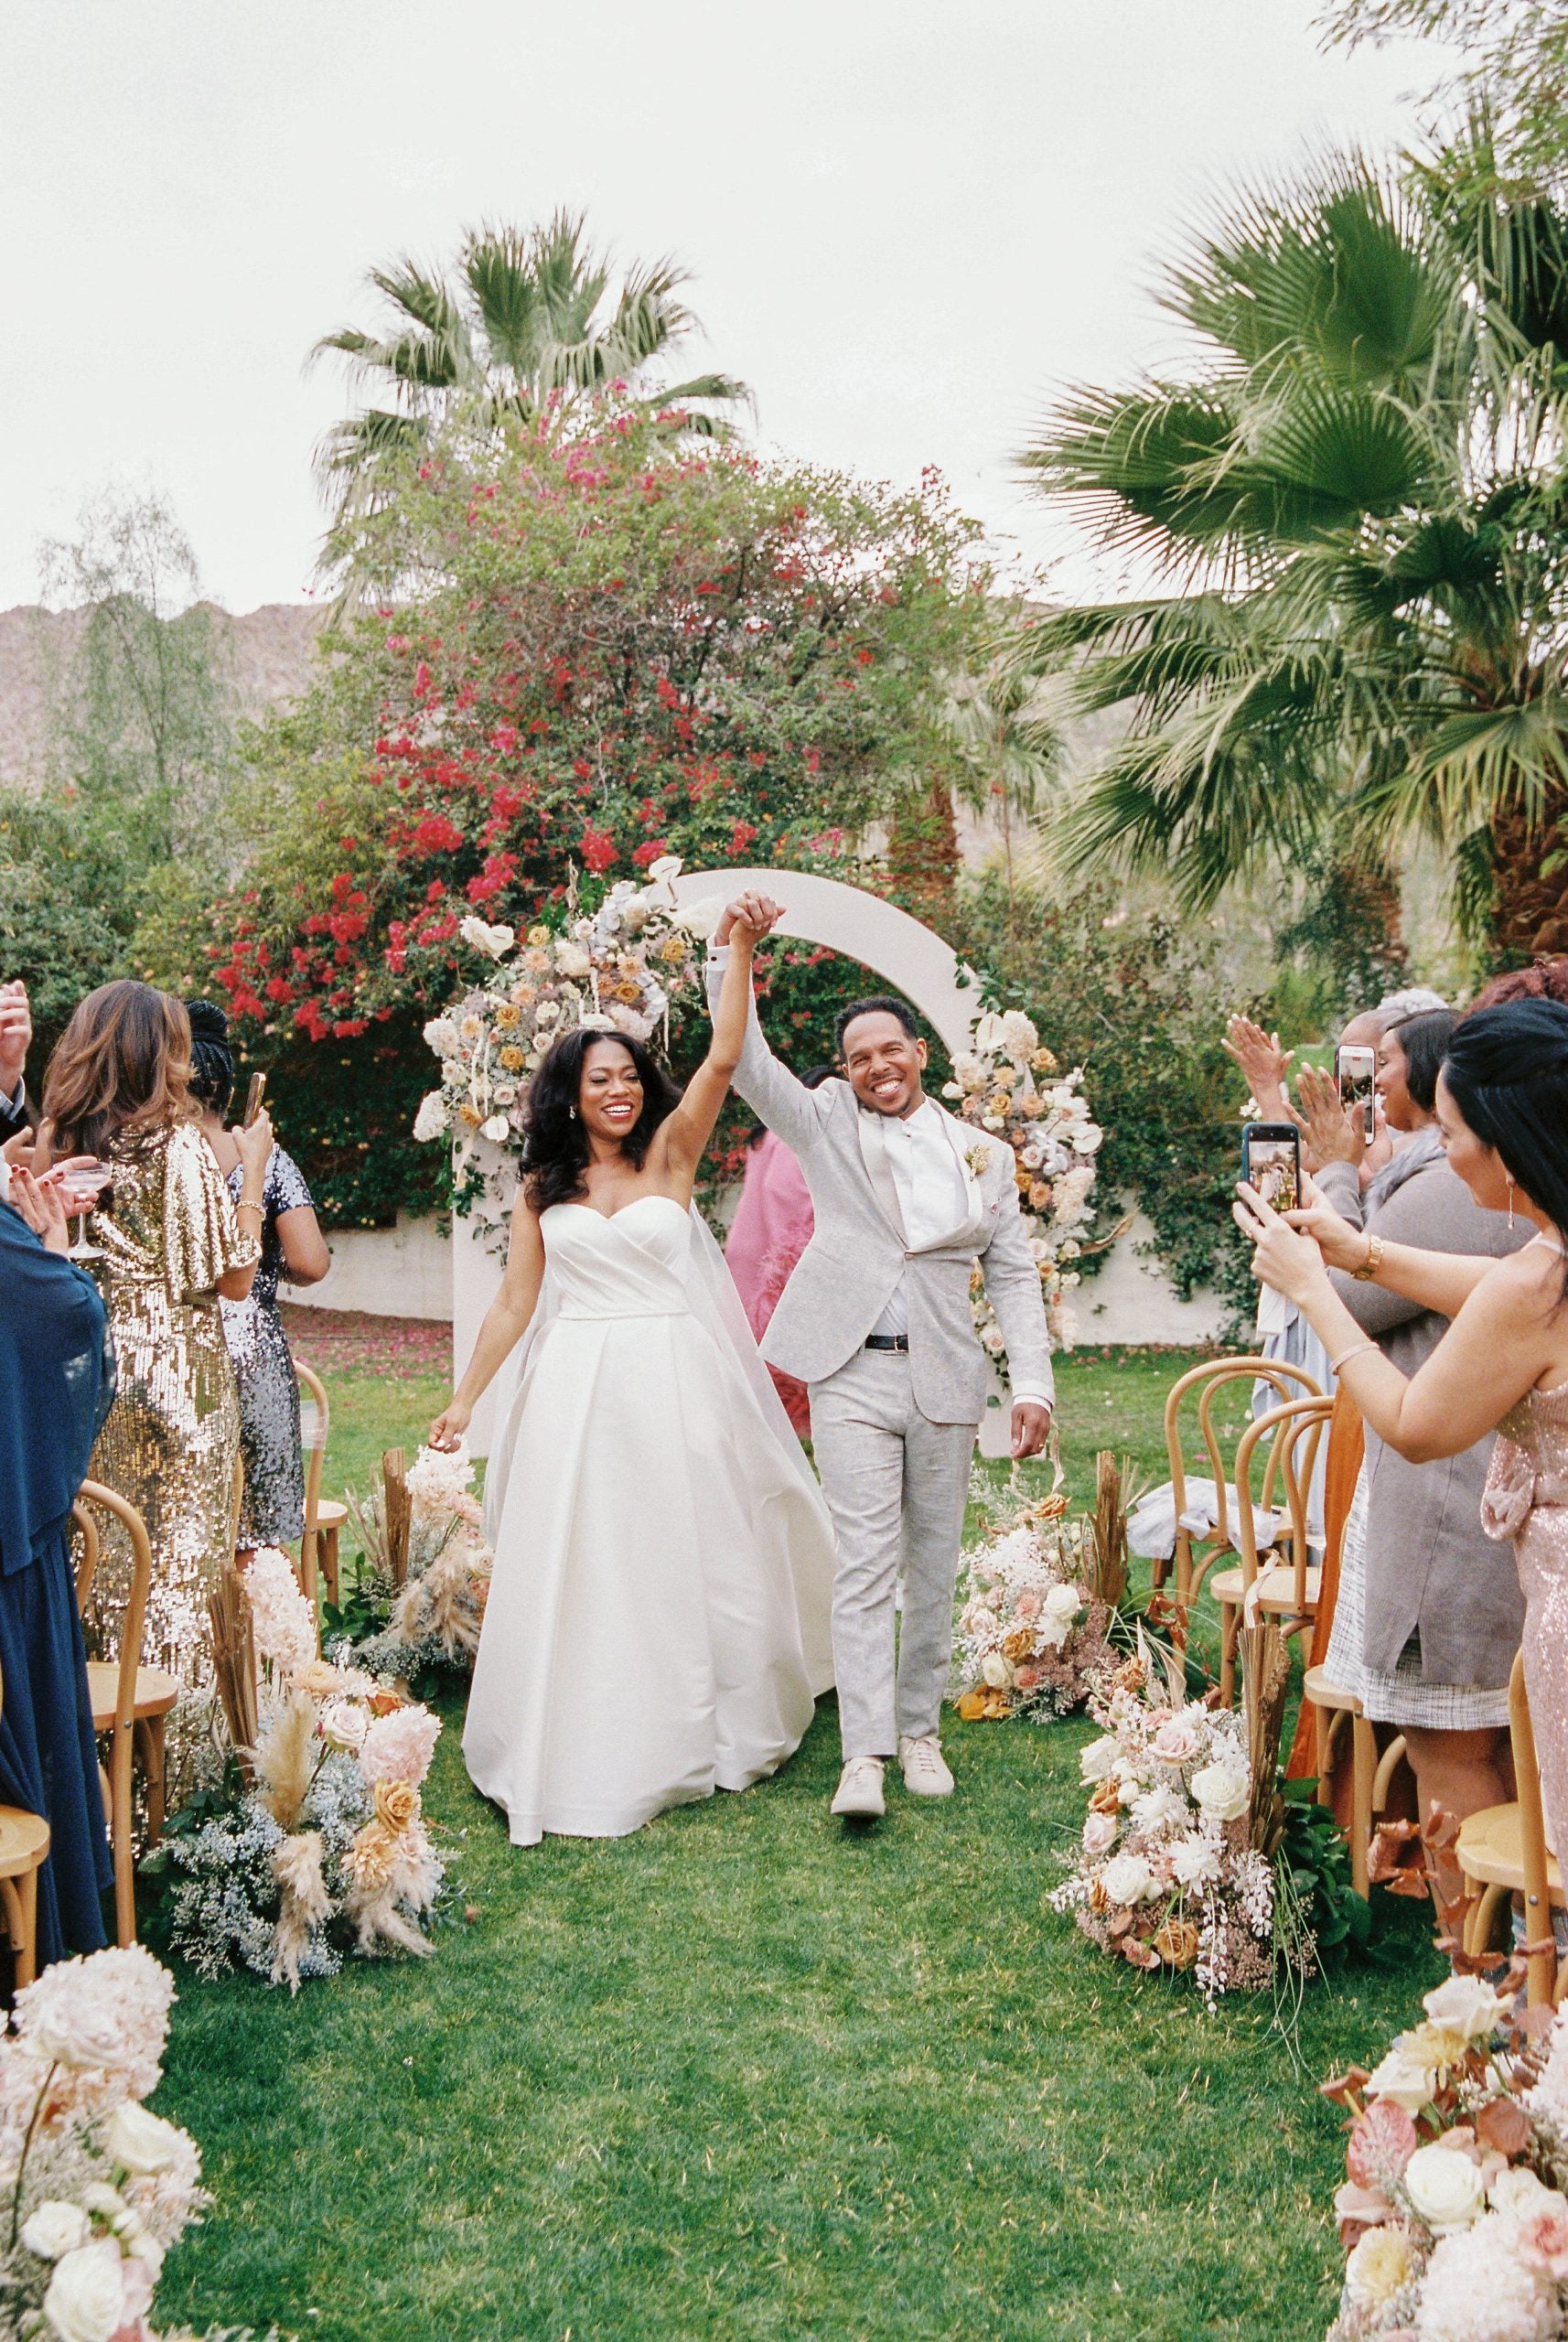 Bridal Bliss: Kendra And Diallobe Said "I Do" In A Magical Celebration In The SoCal Desert